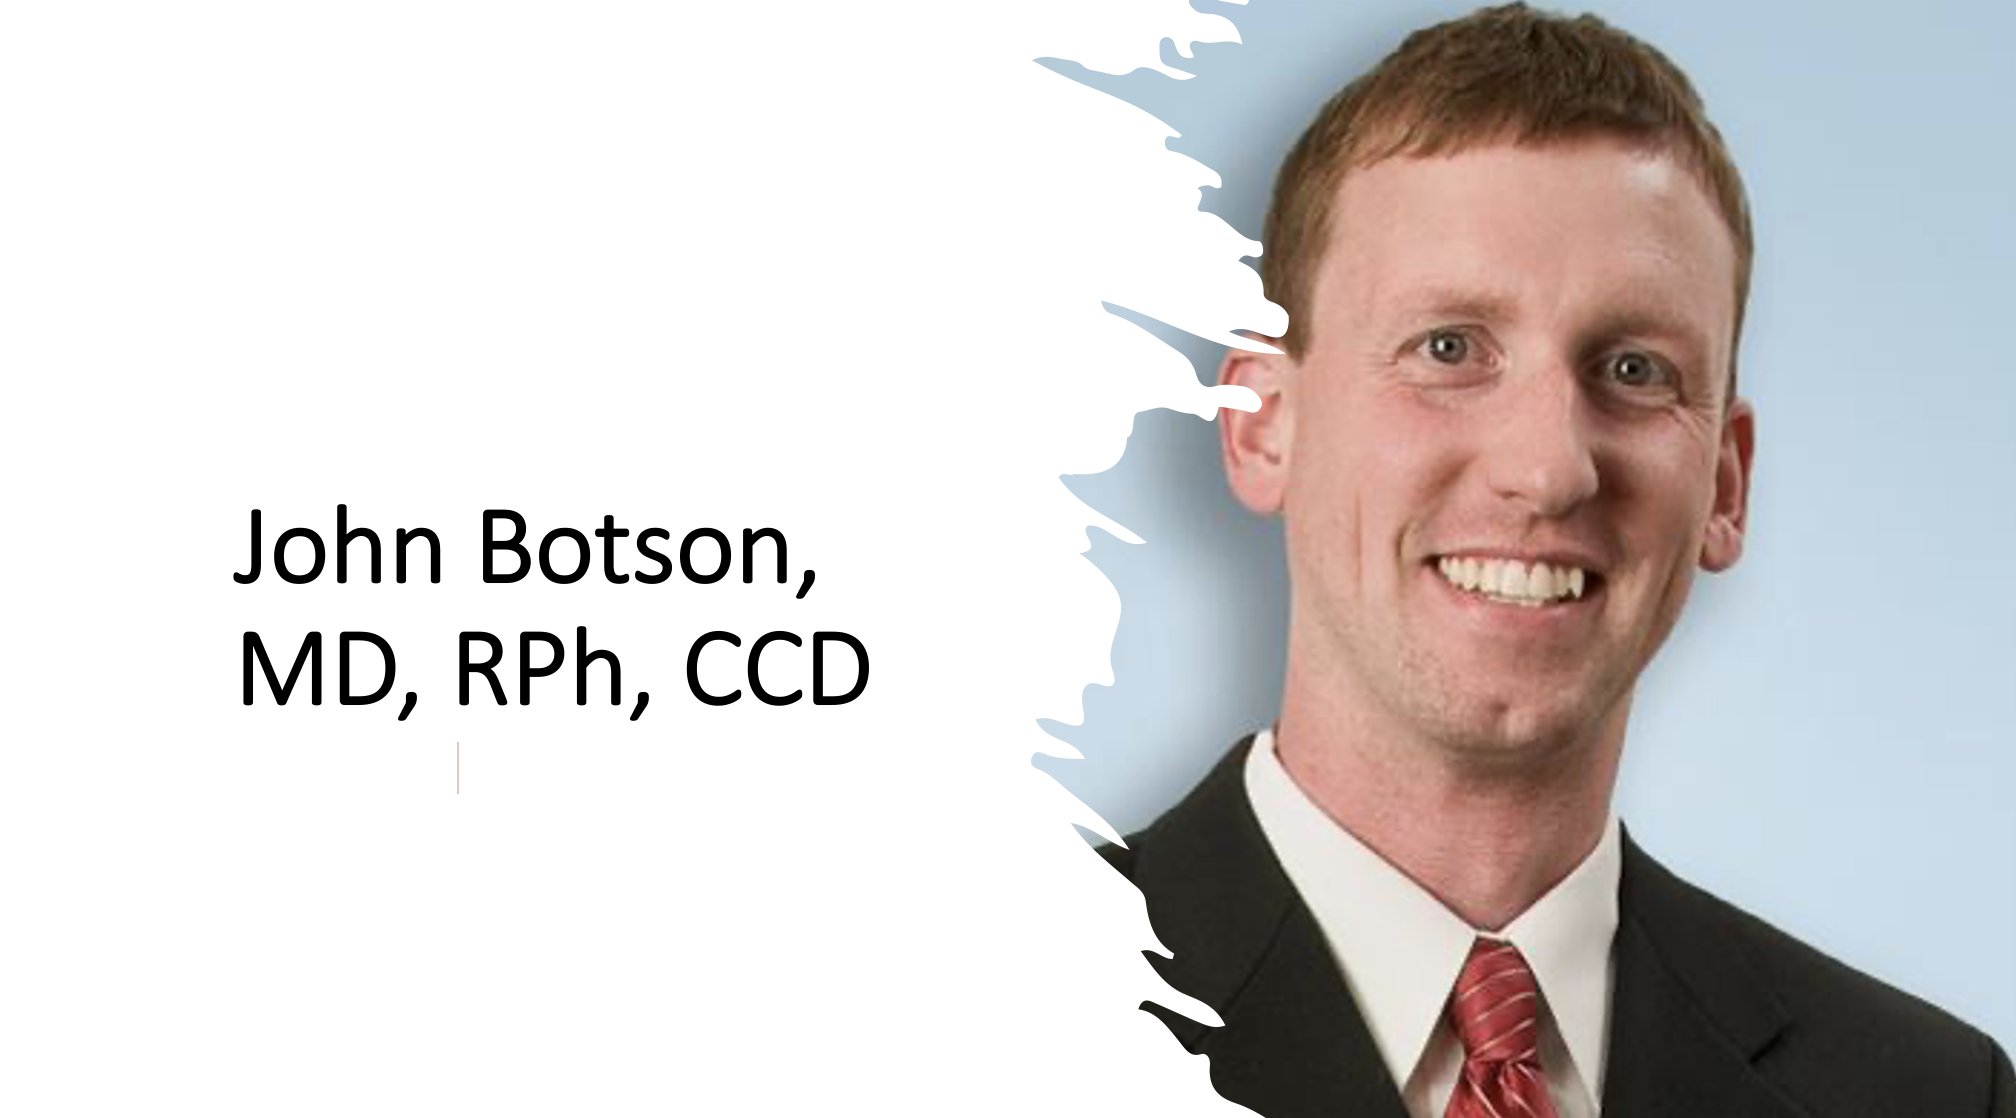 John Botson, MD, RPh, CCD: Pegloticase Efficacy and Safety in Patients With Gout